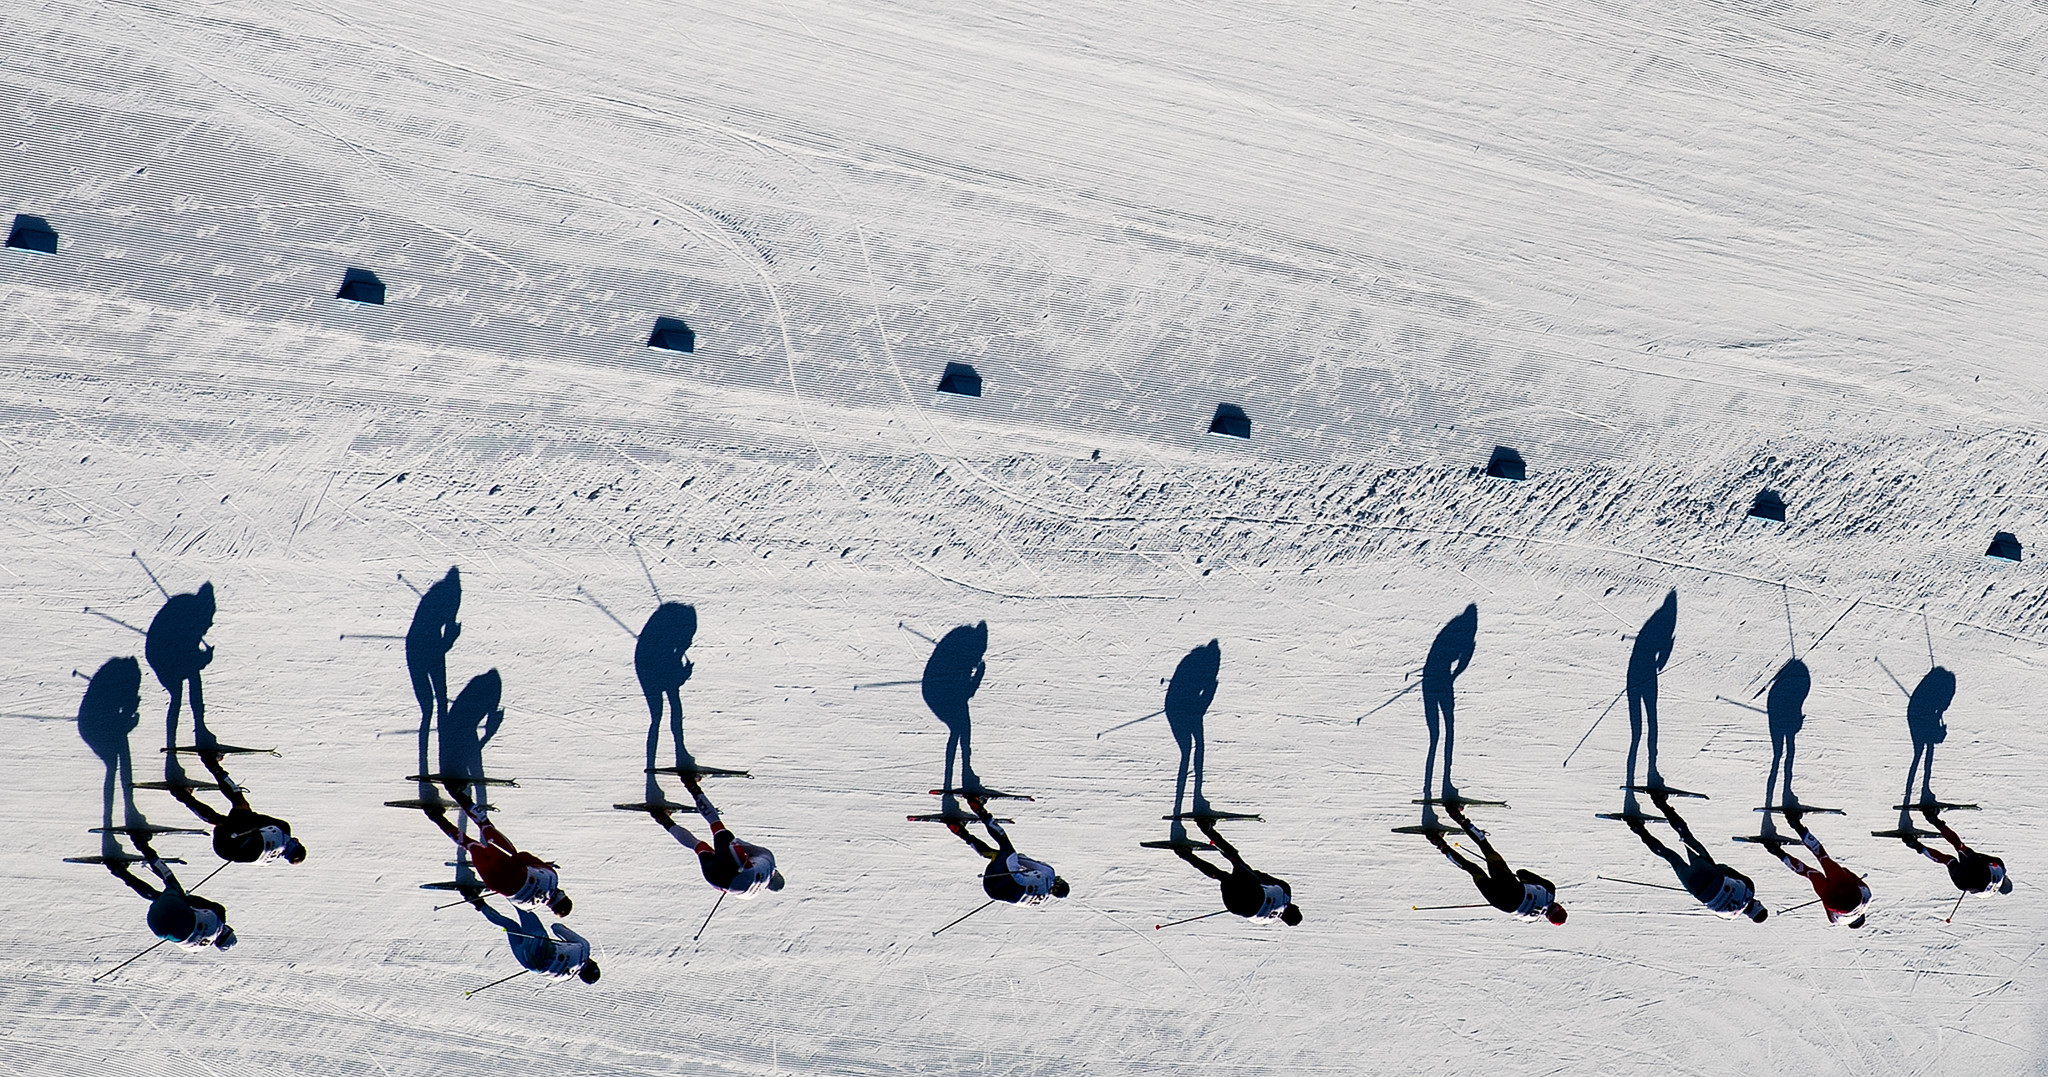 The 2019 edition of the FIS Nordic Ski World Championships is due to begin later this month ©Getty Images